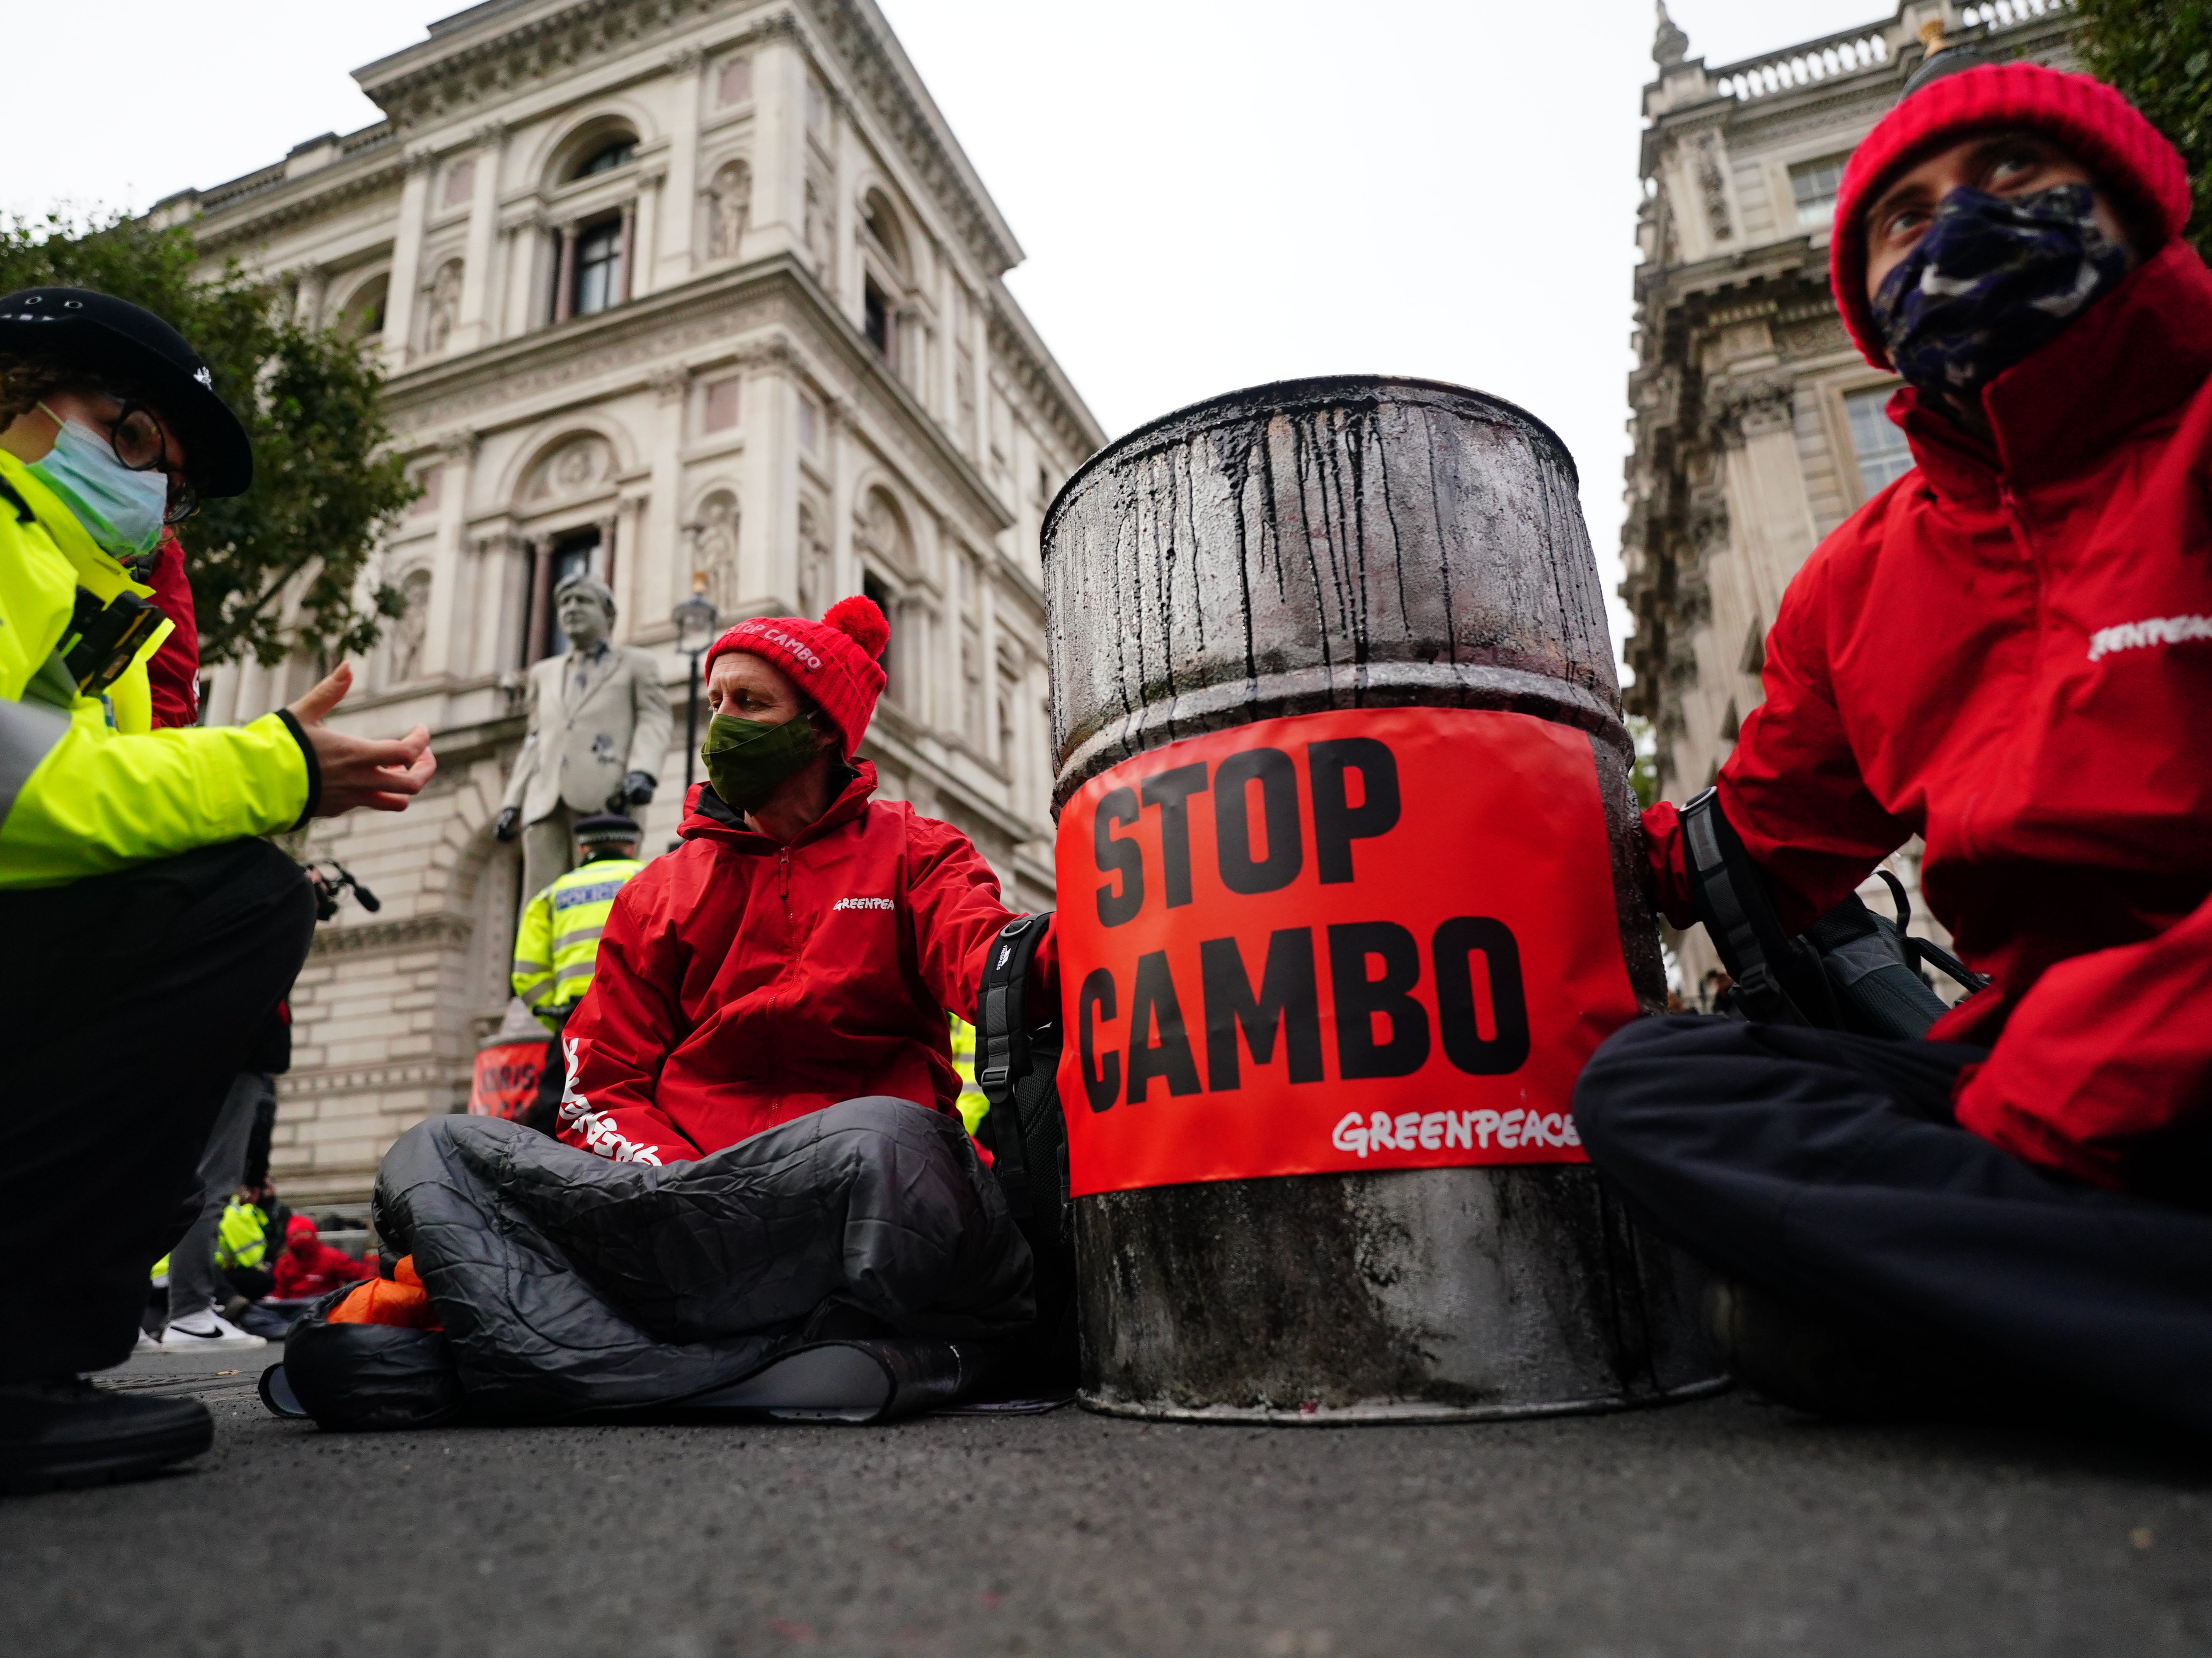 <p>Campaigners from Greenpeace opposed to Cambo oilfield project outside Downing Street</p>